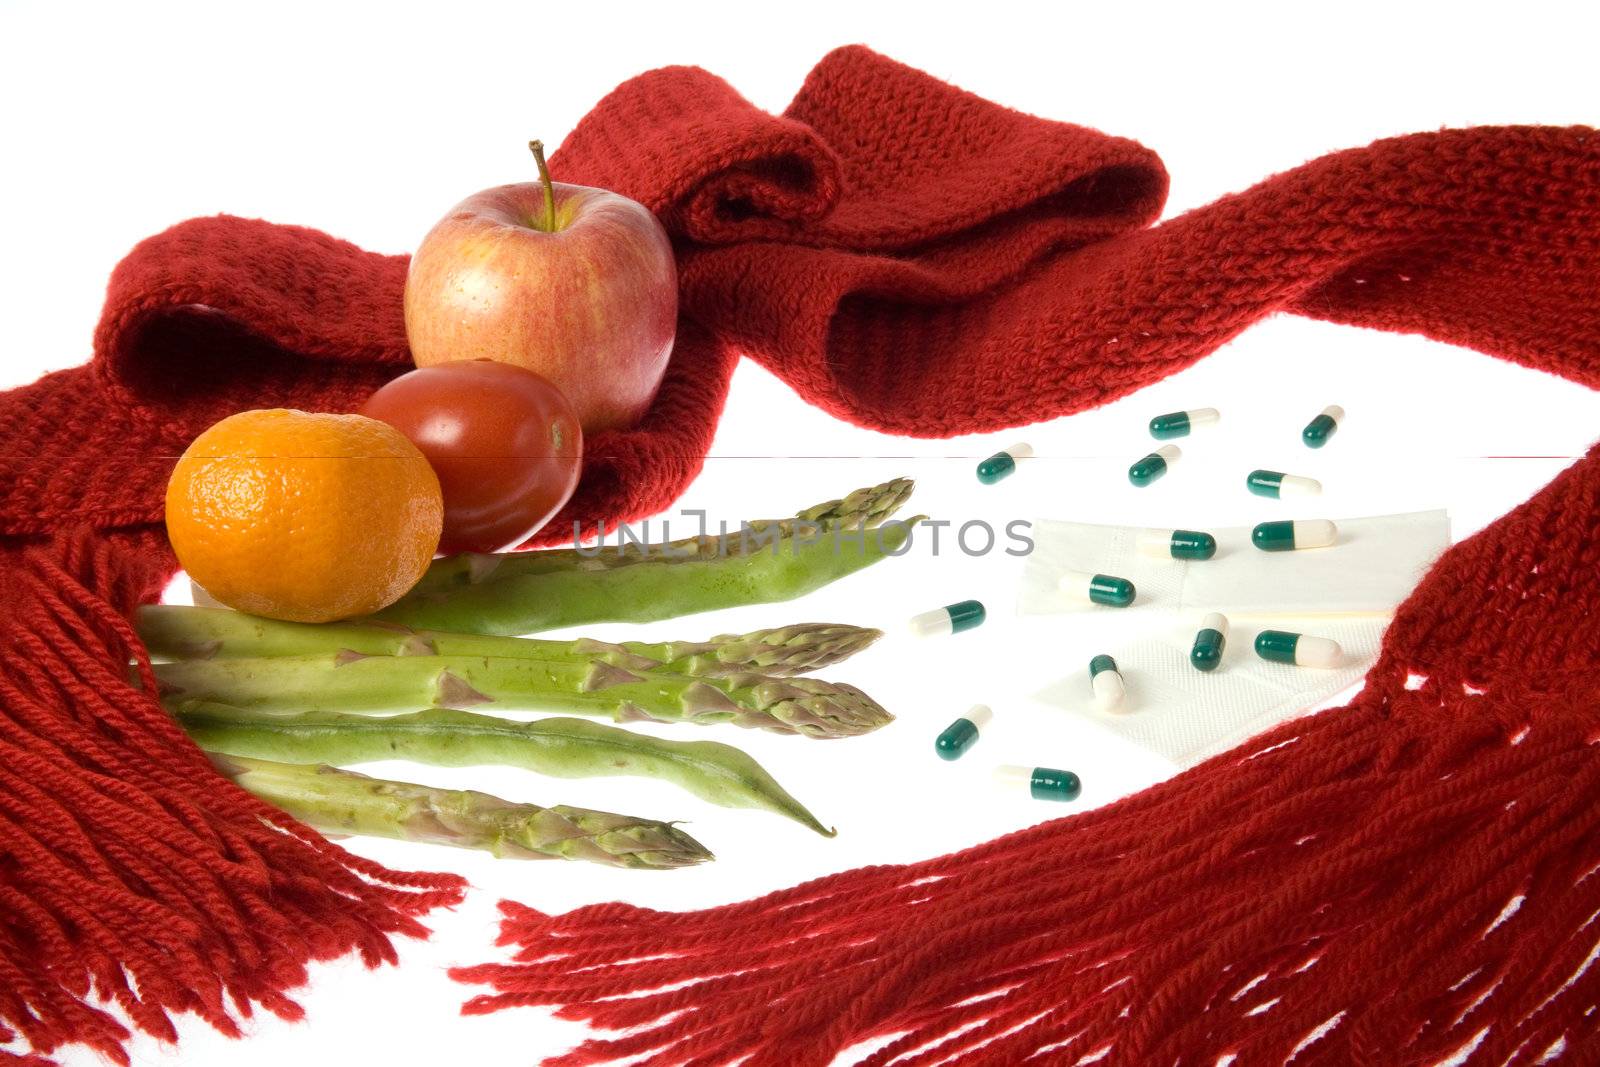 A scarf wrapped around fruits, vegetables, medicaments, handkerchiefs representing health care.